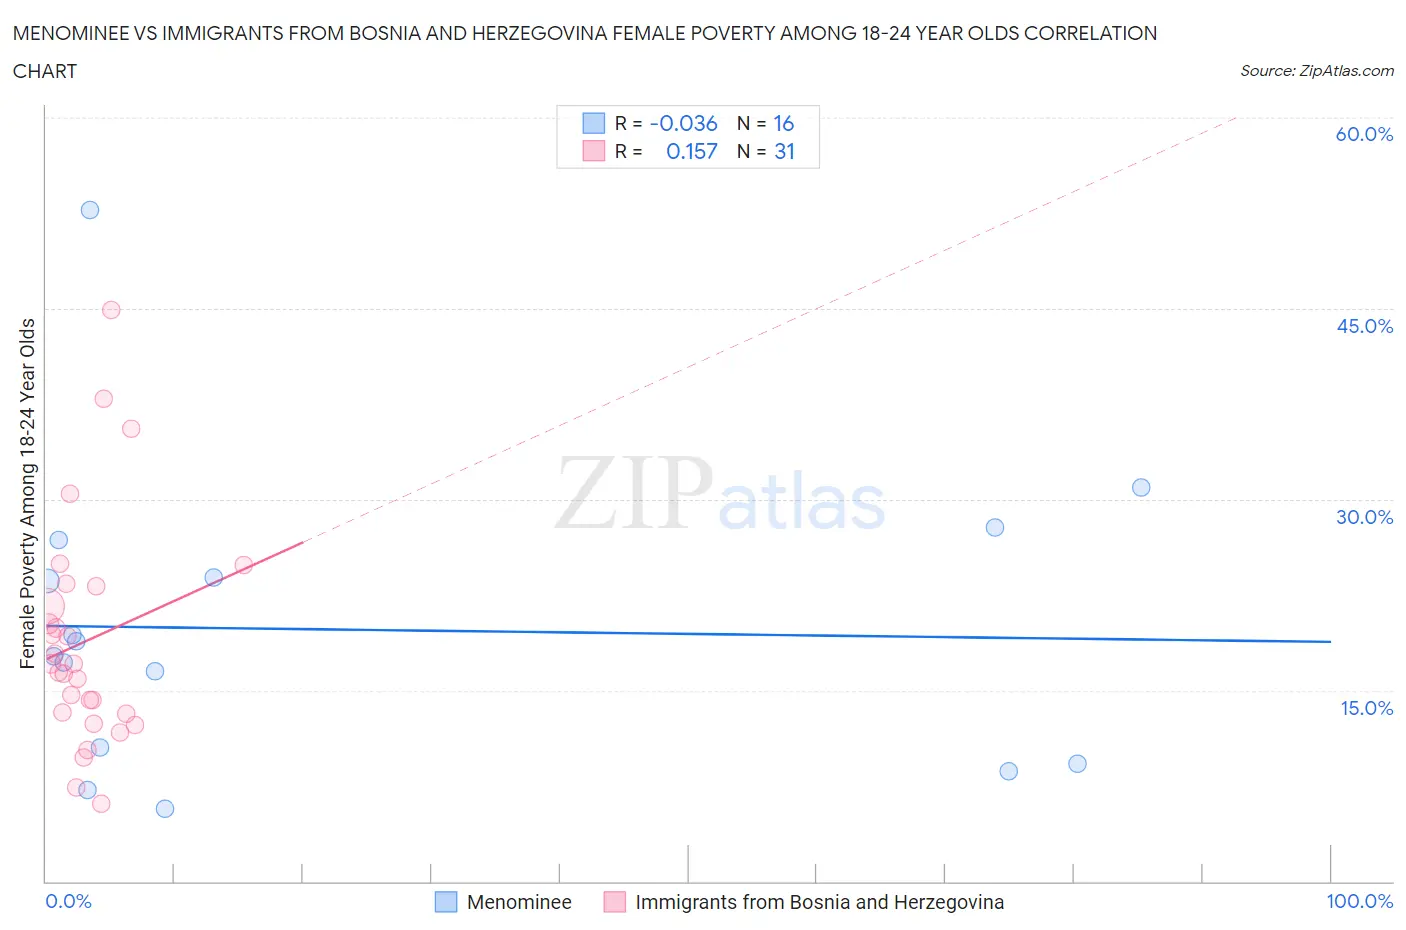 Menominee vs Immigrants from Bosnia and Herzegovina Female Poverty Among 18-24 Year Olds